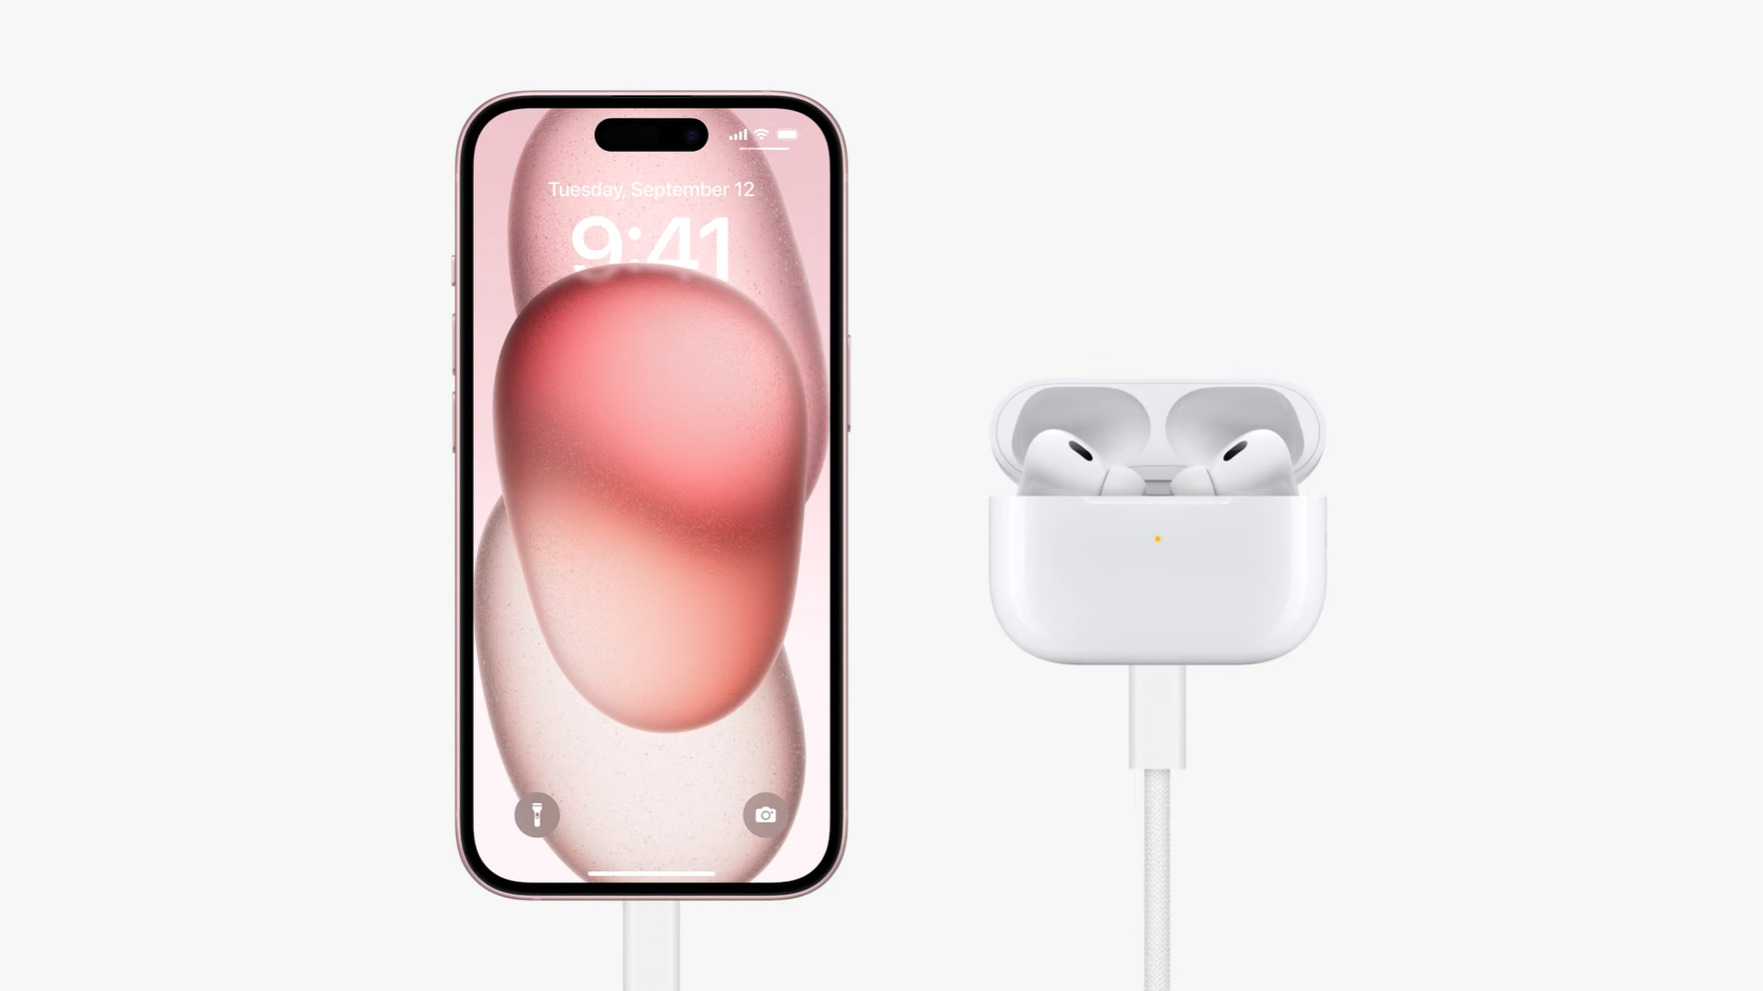 An iPhone 15 will be able to recharge the AirPods Pro 2 case